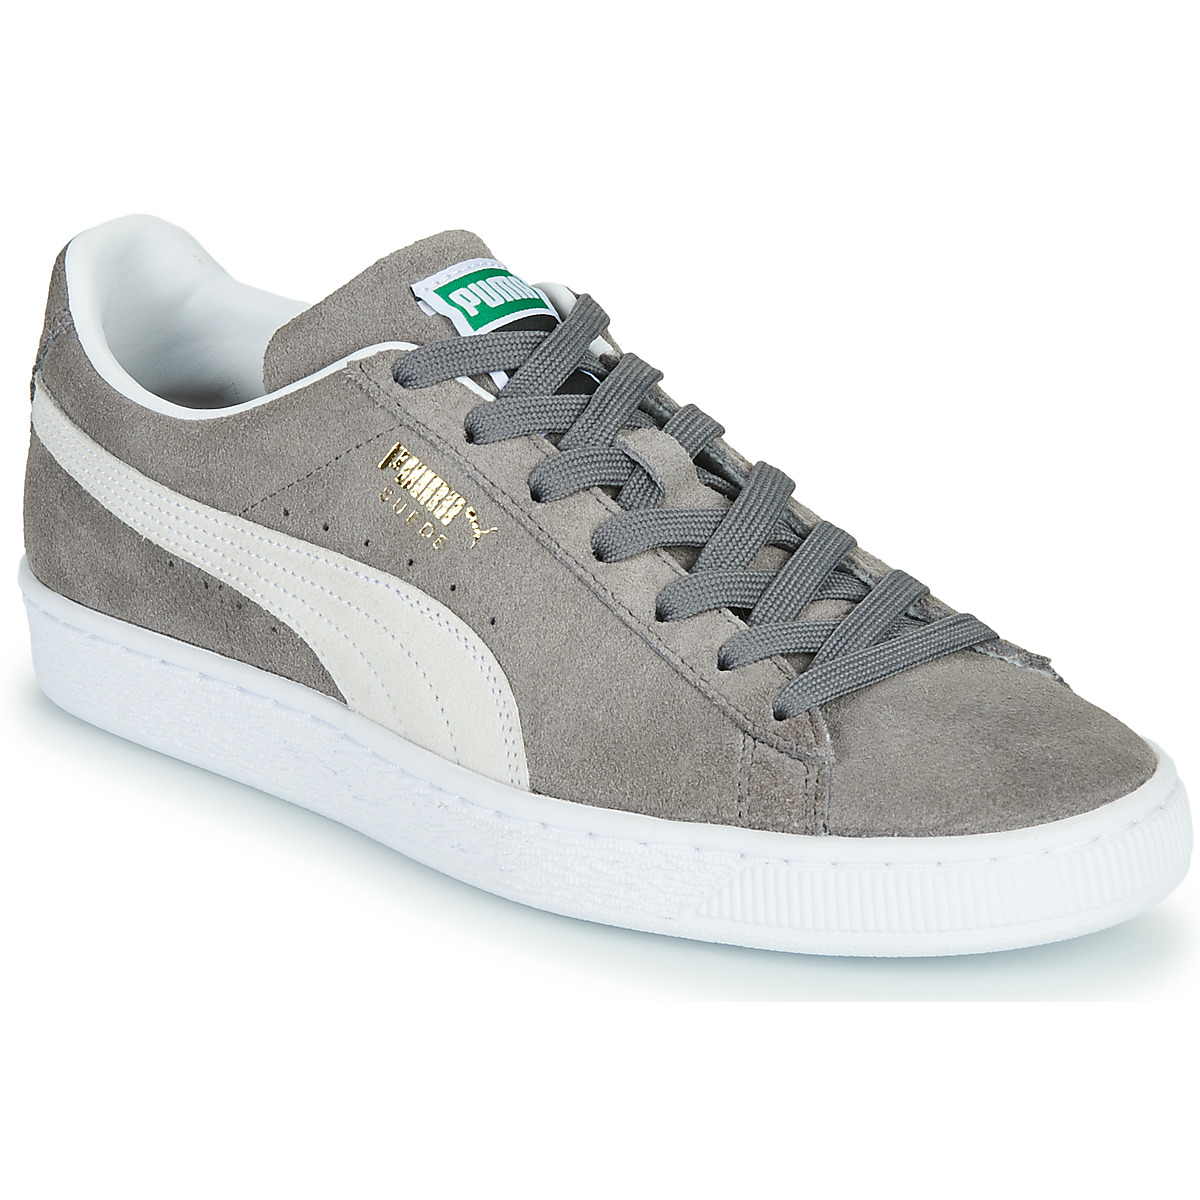 Chaussures Homme Stampd x Puma Trinomic Sock NM & Blaze of Glory NU SUEDE Gris